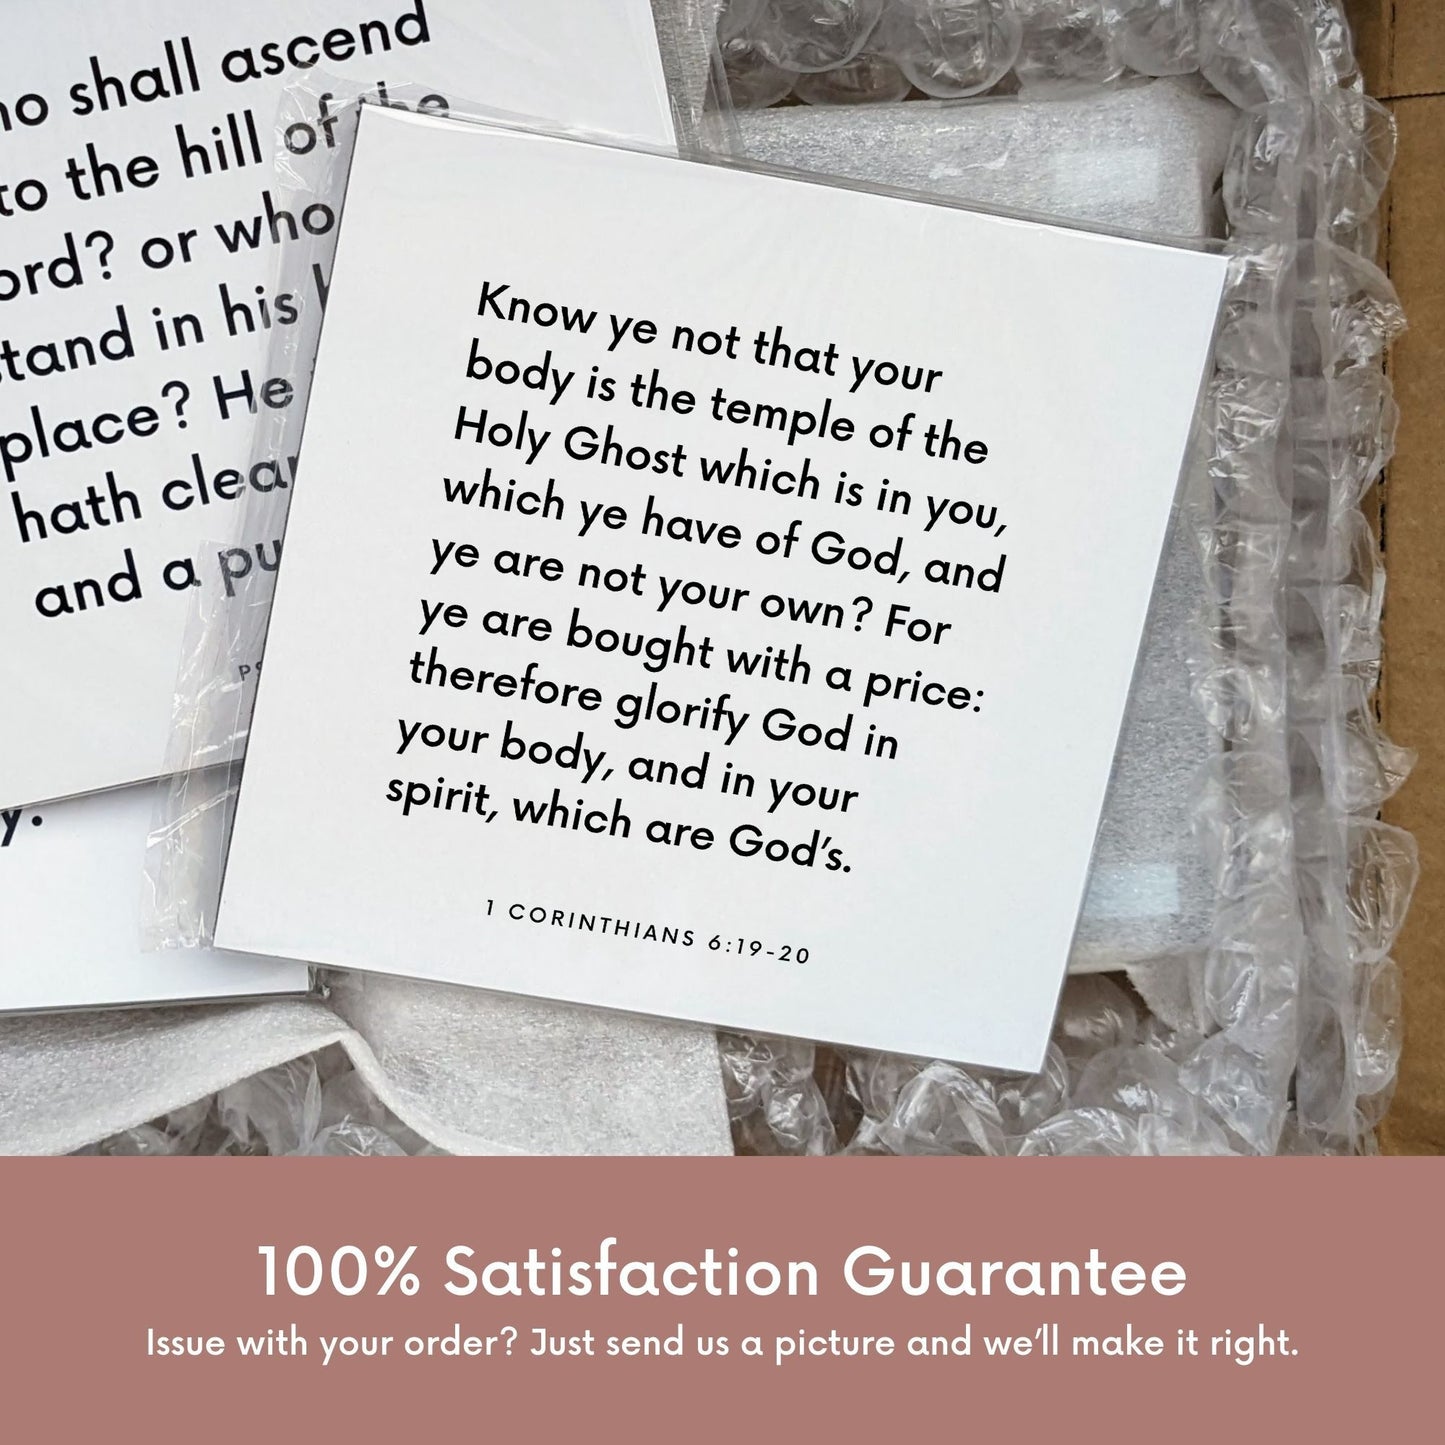 Shipping materials for scripture tile of 1 Corinthians 6:19-20 - "Know ye not that your body is the temple of the Holy Ghost"